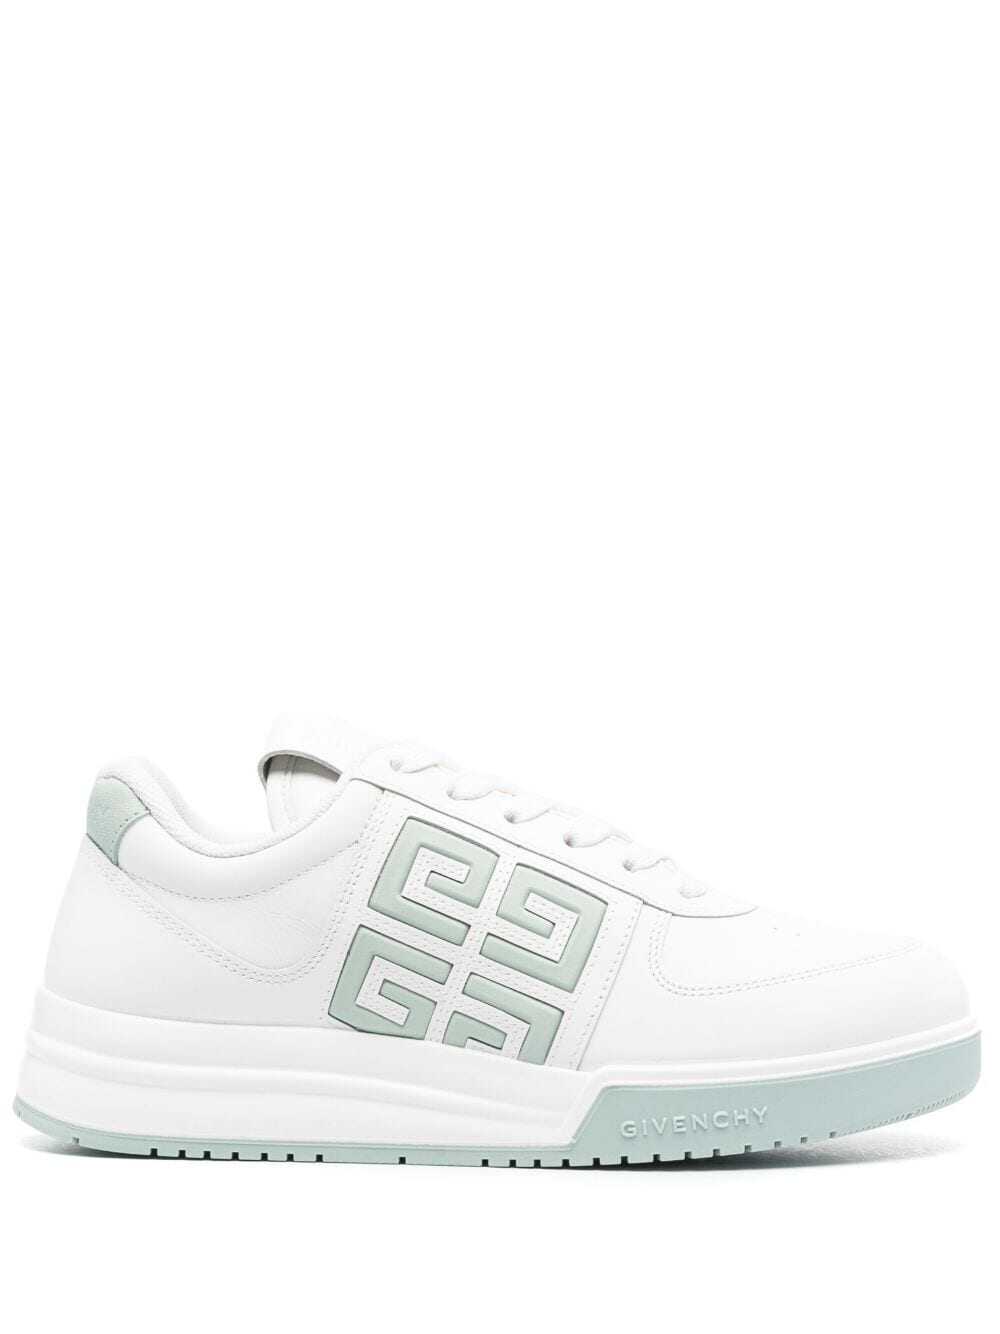 Givenchy Sneakers White White image5